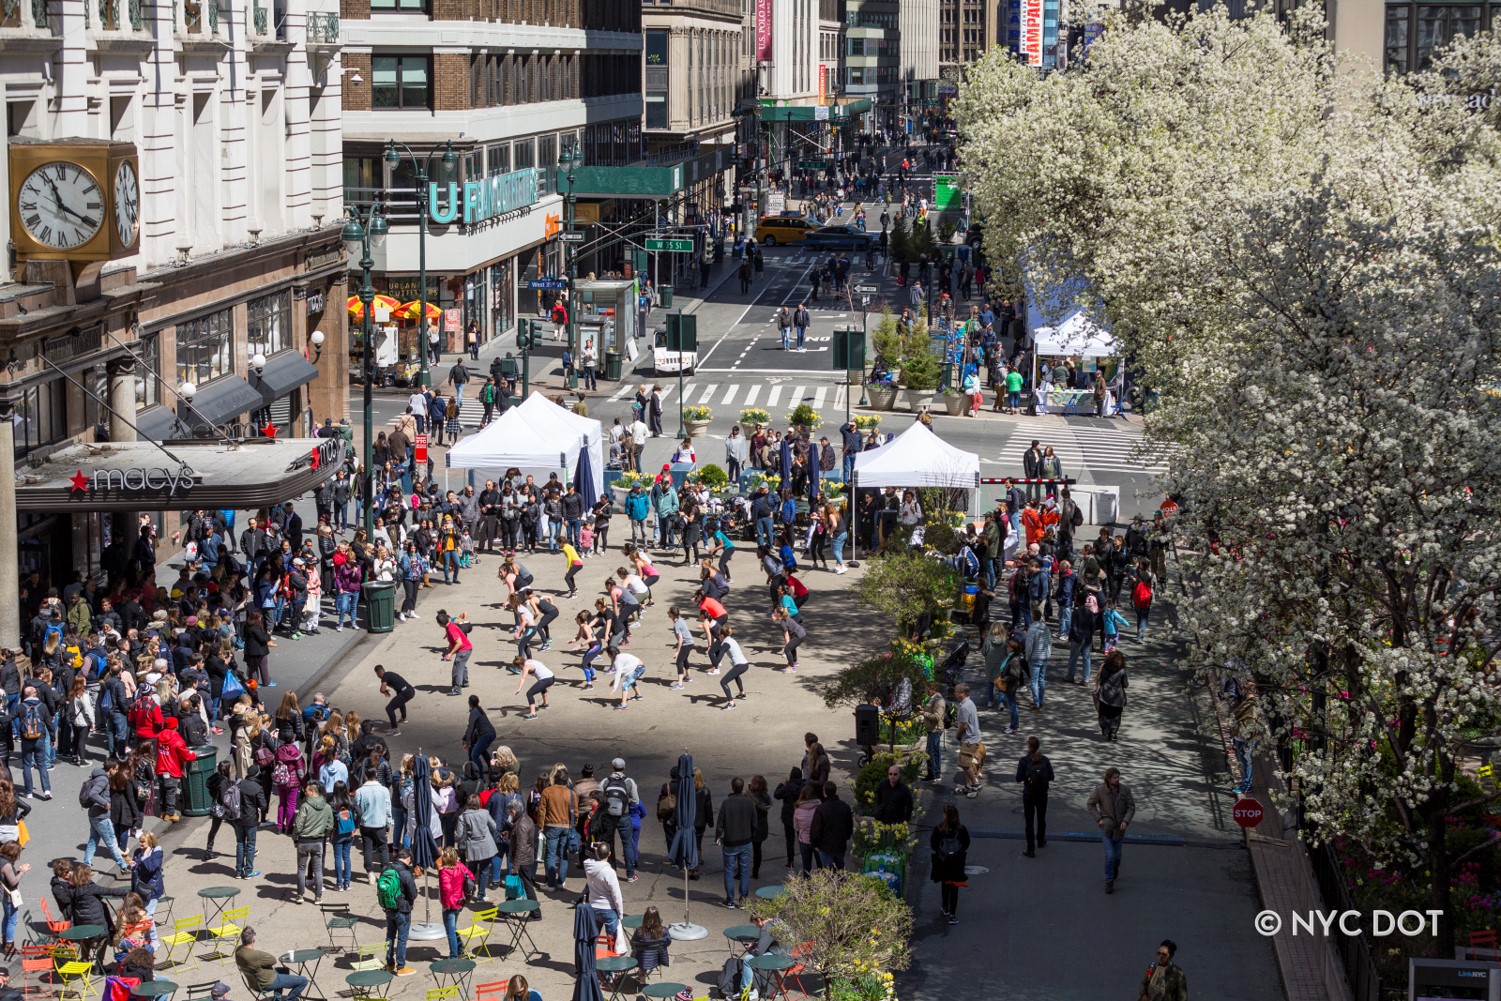 A birds eye view of people participating in a dance program at Herald Square